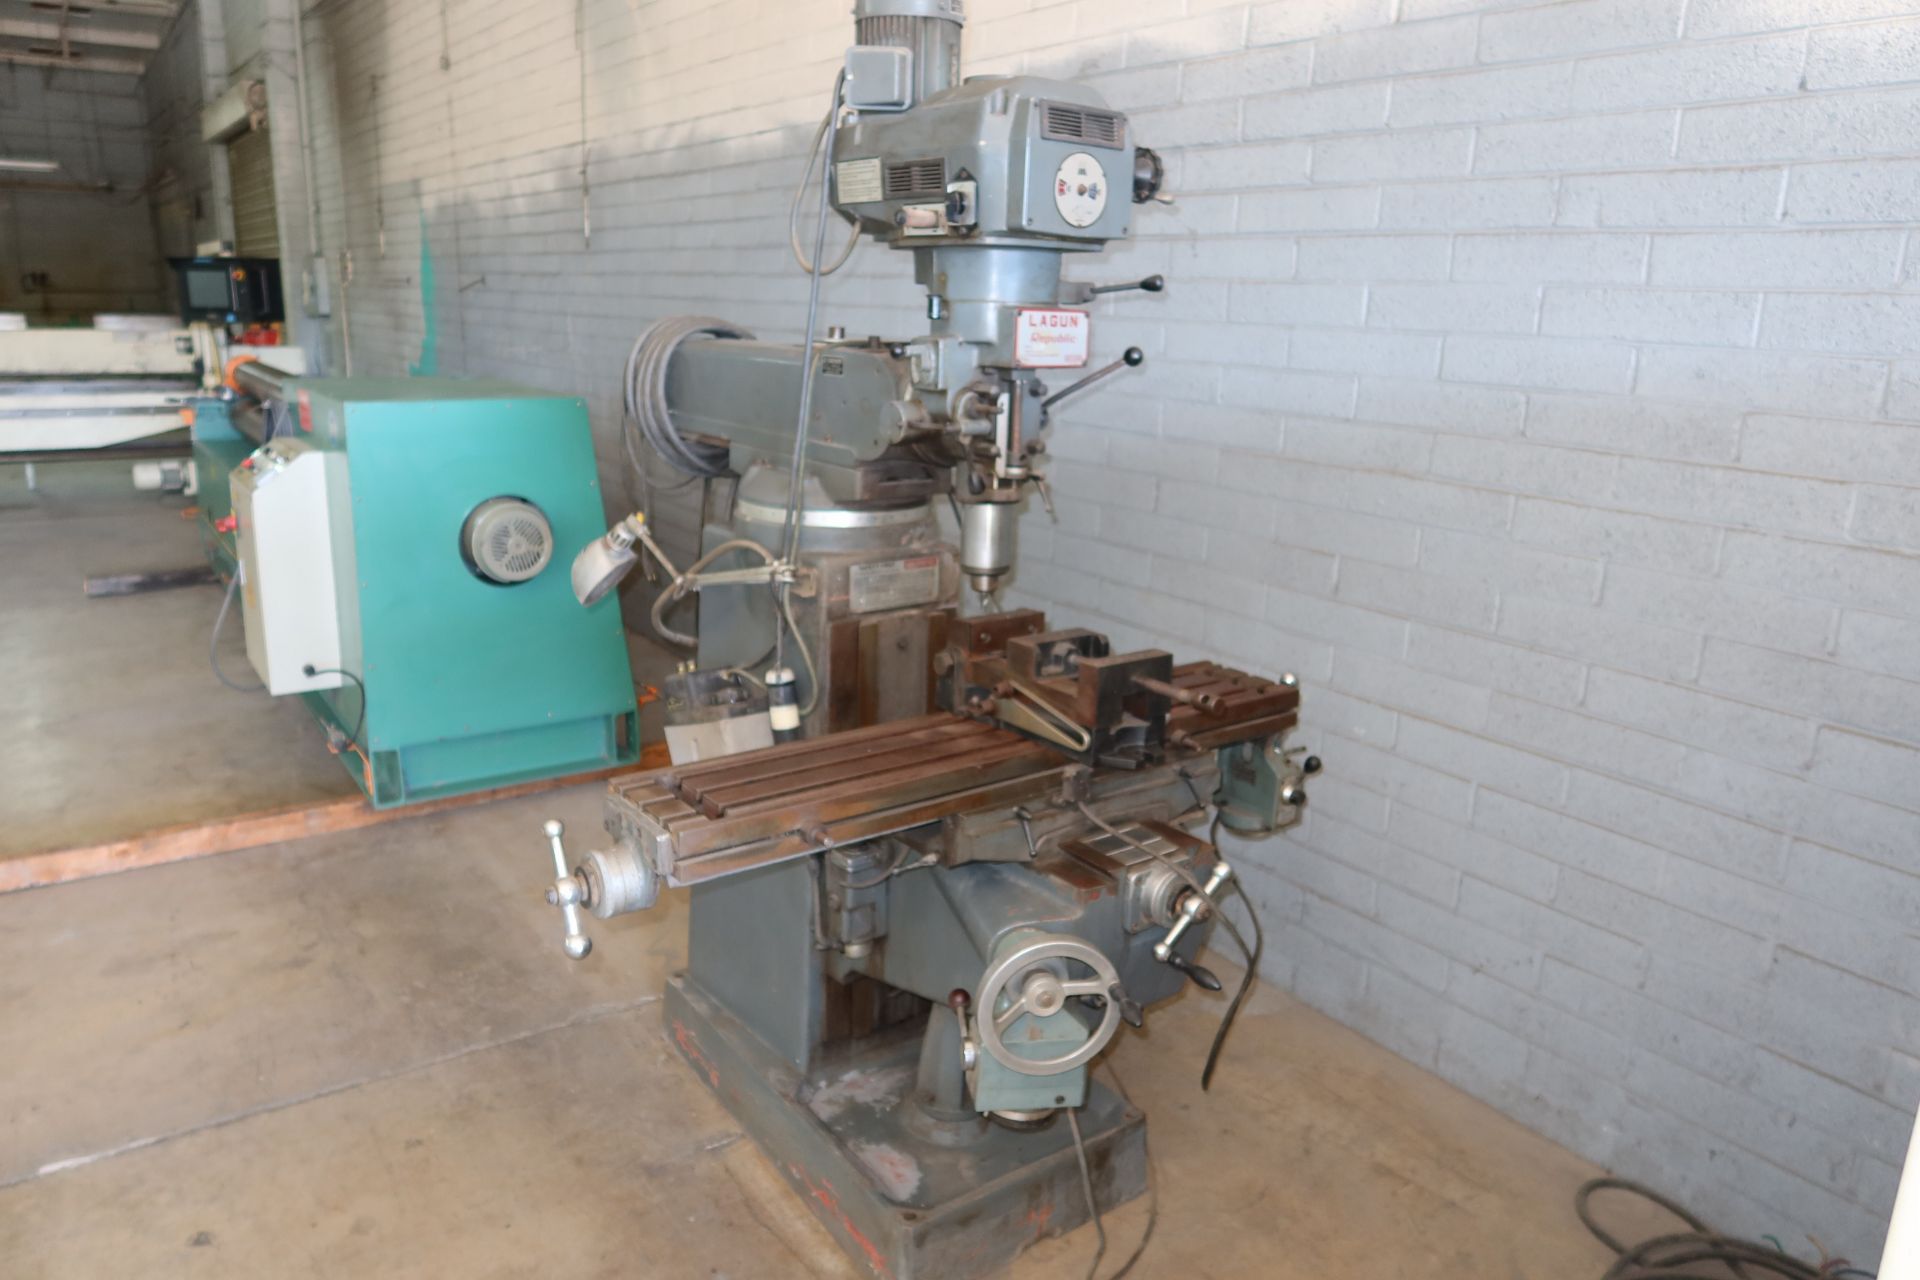 LAGUN VERTICAL MILL, POWER TABLE & KNEE, 50" X 10" TABLE, 2-AXIS DRO & MILL VISE, LOCATED: 3845 N.